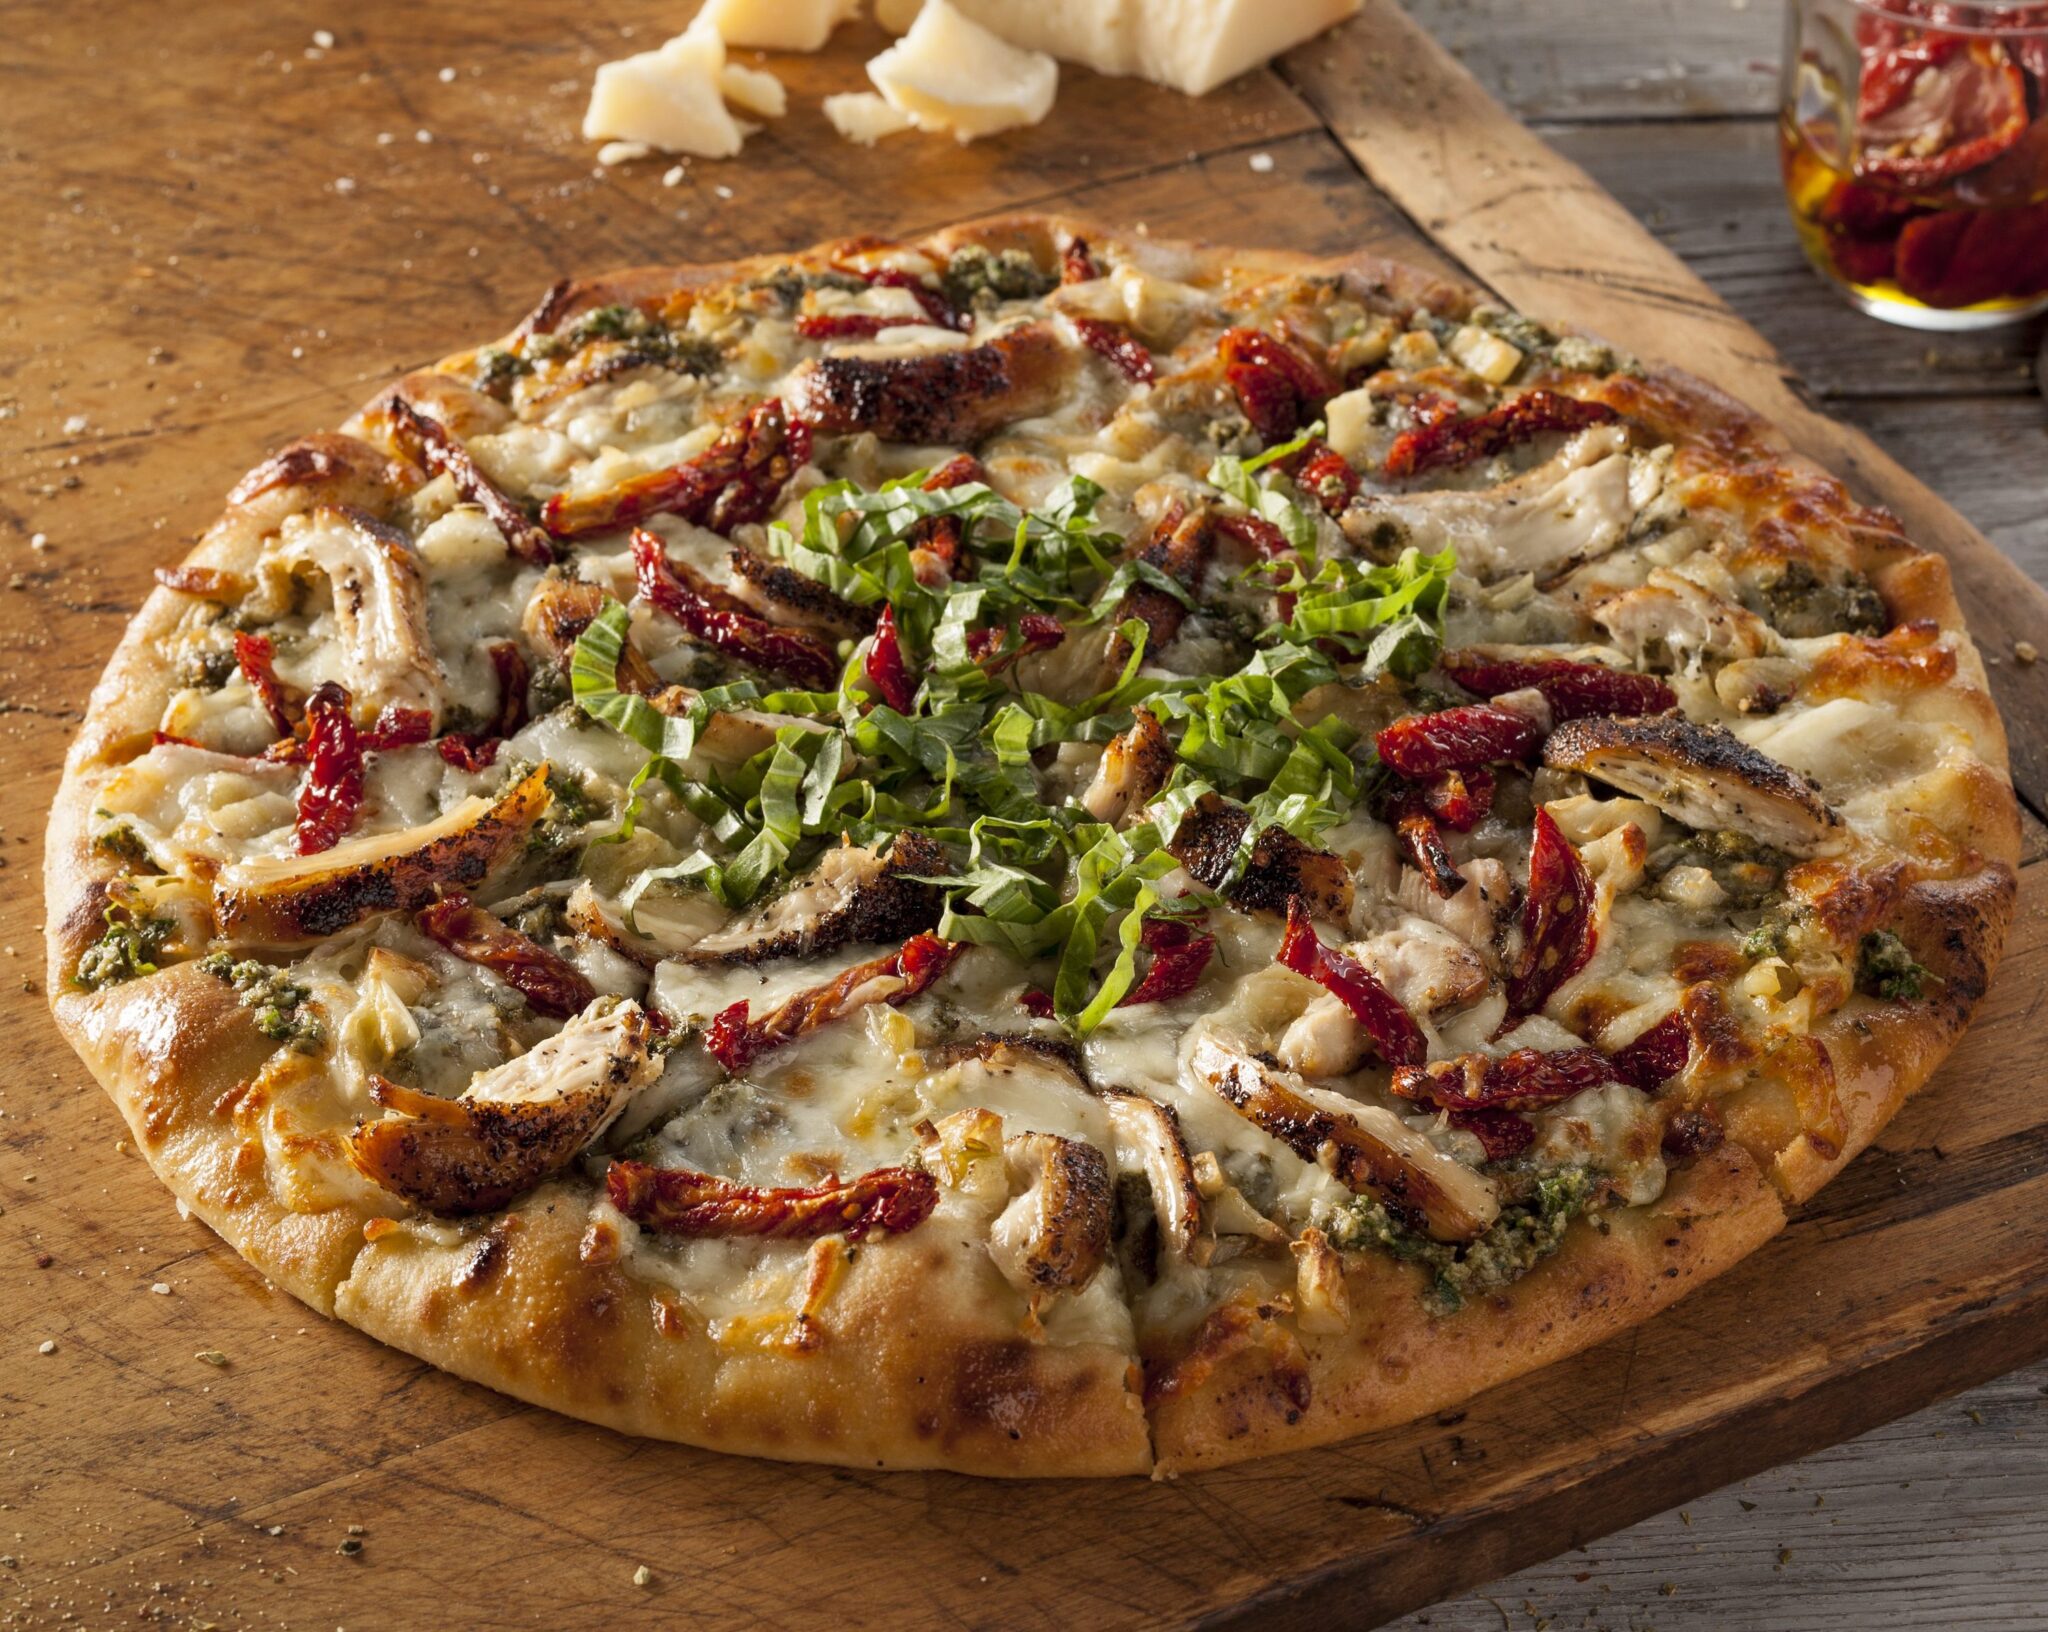 Roasted chicken, roasted red pepper, basil and cheese topped pizza.